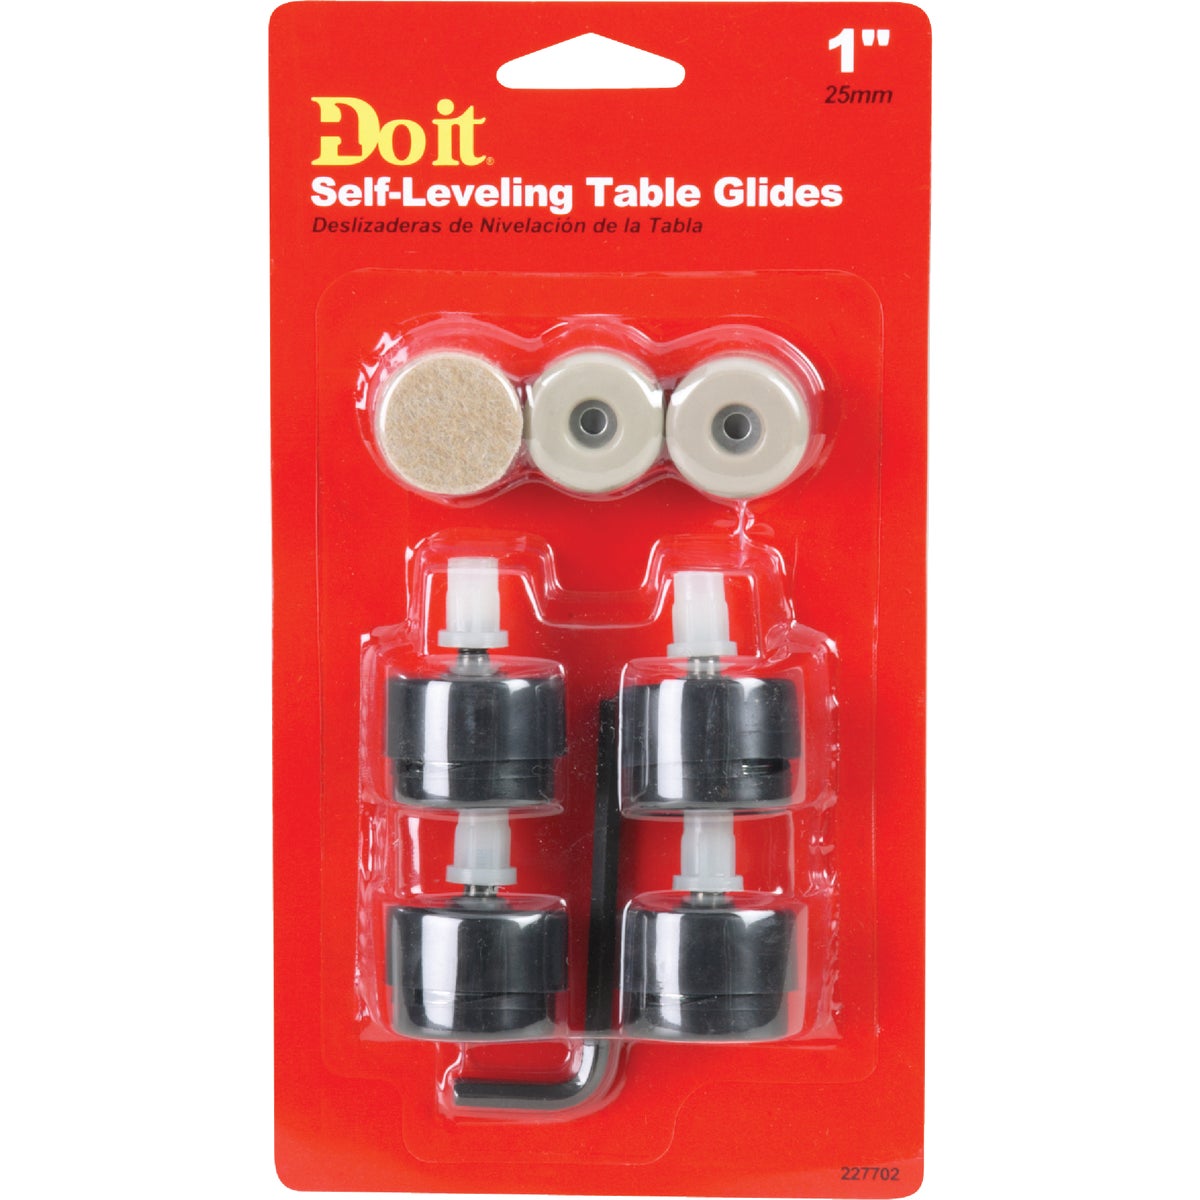 Item 227702, Do it self-leveling table glides have a self-leveling spring mechanism that